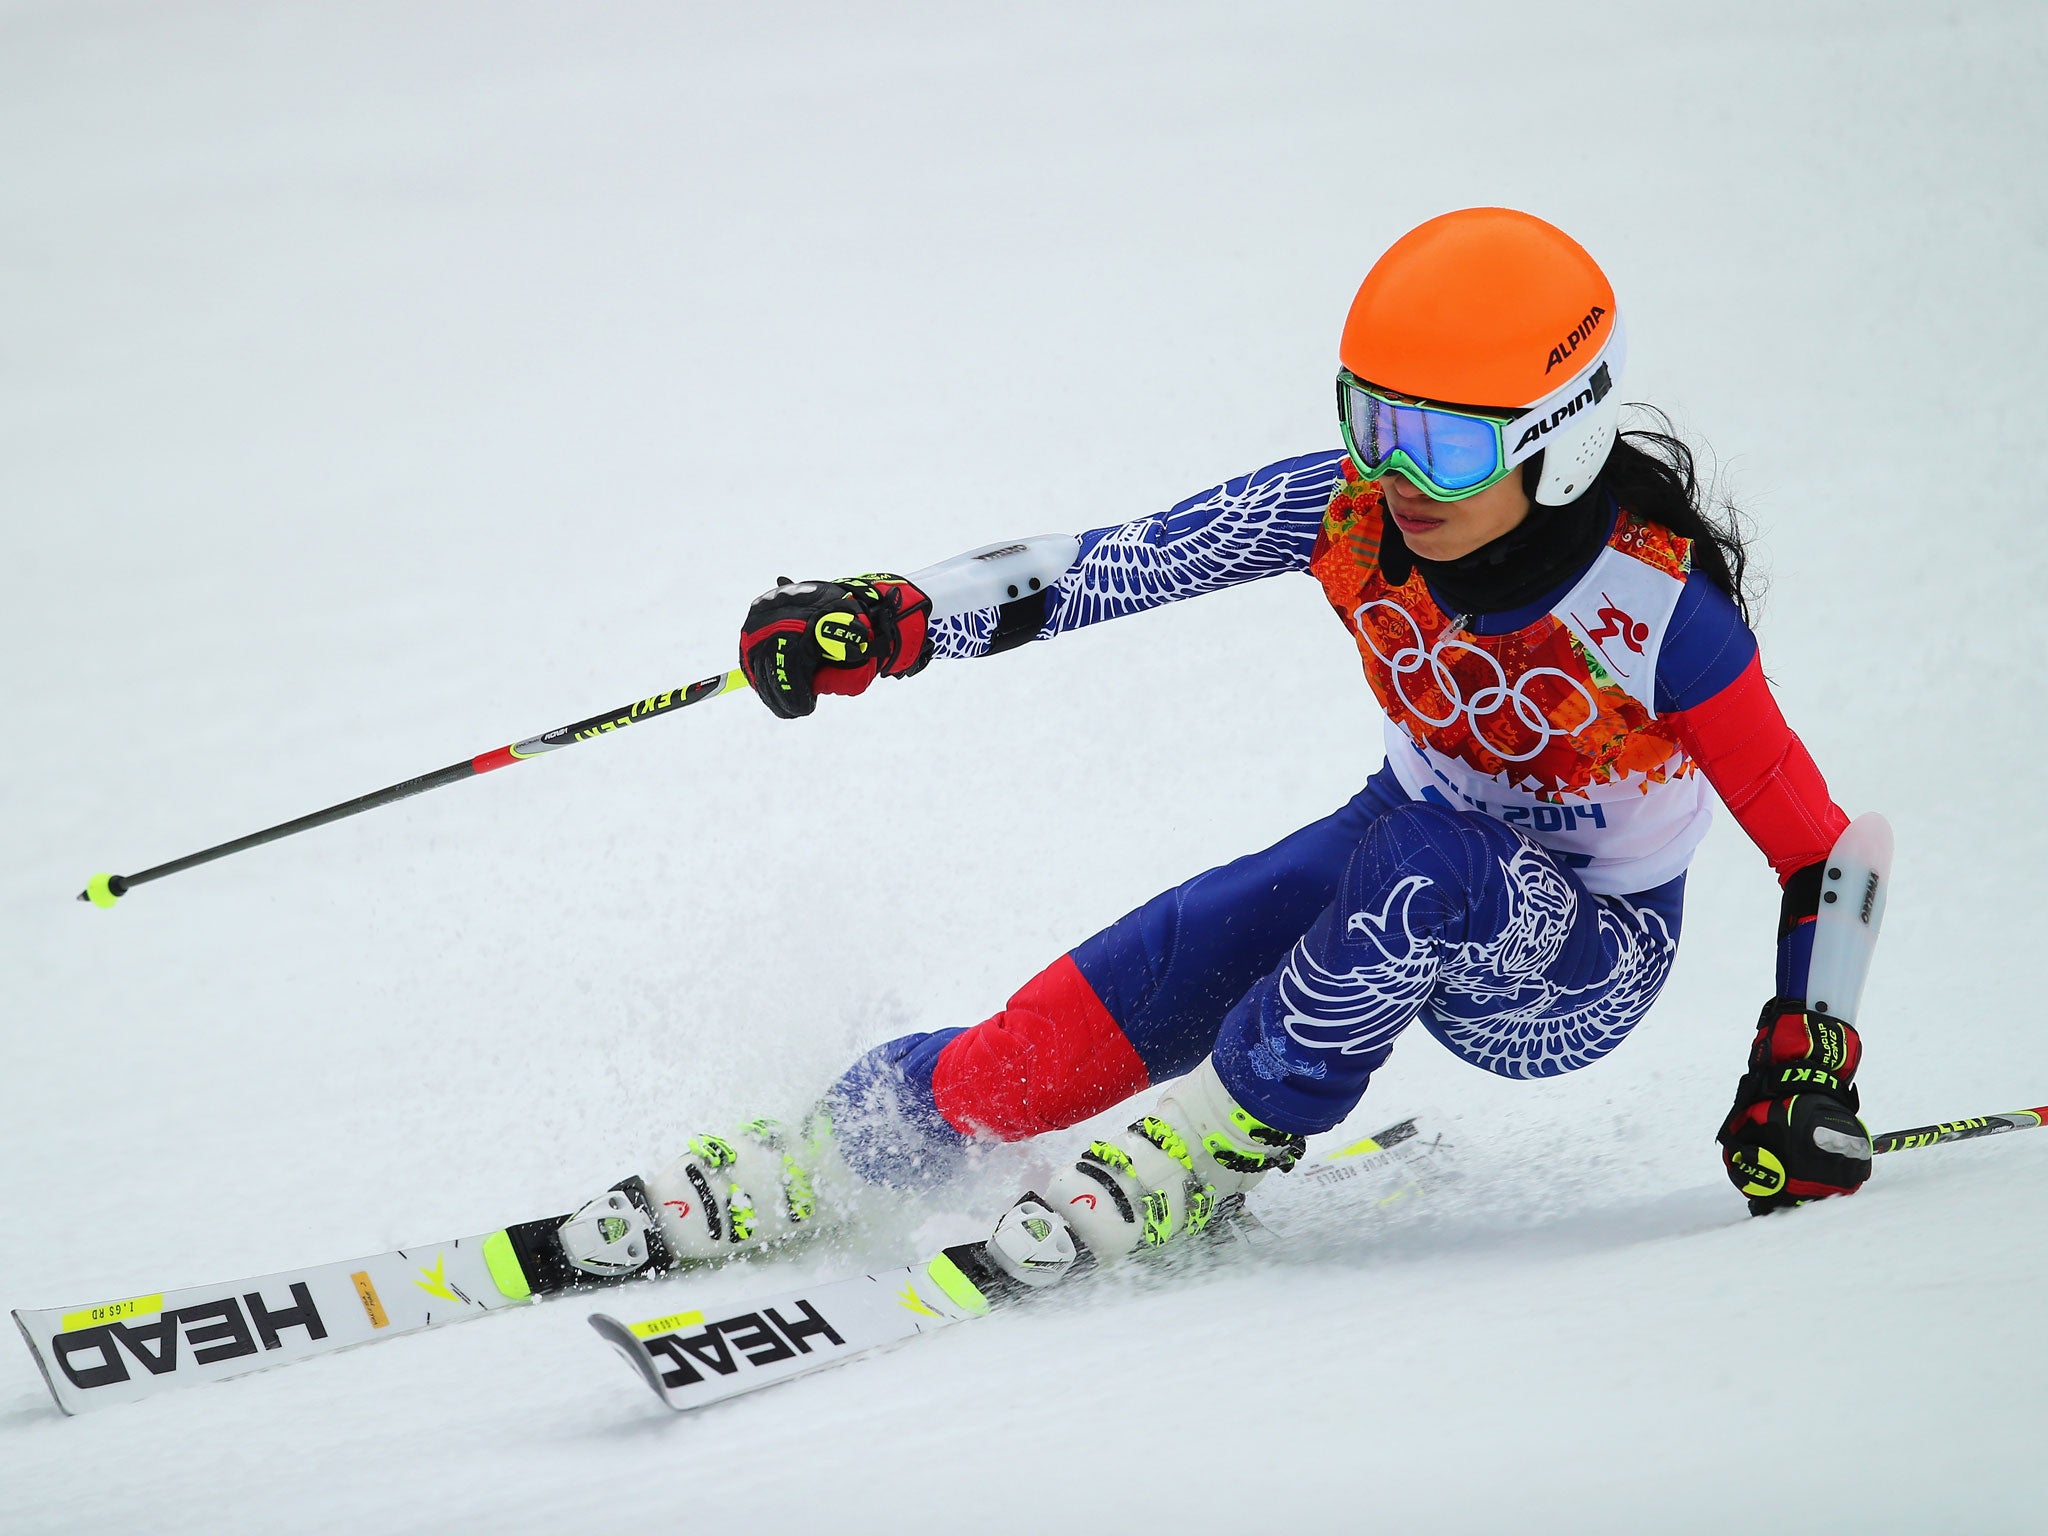 Vanessa-Mae finished 74th after her first run in the women's giant slalom